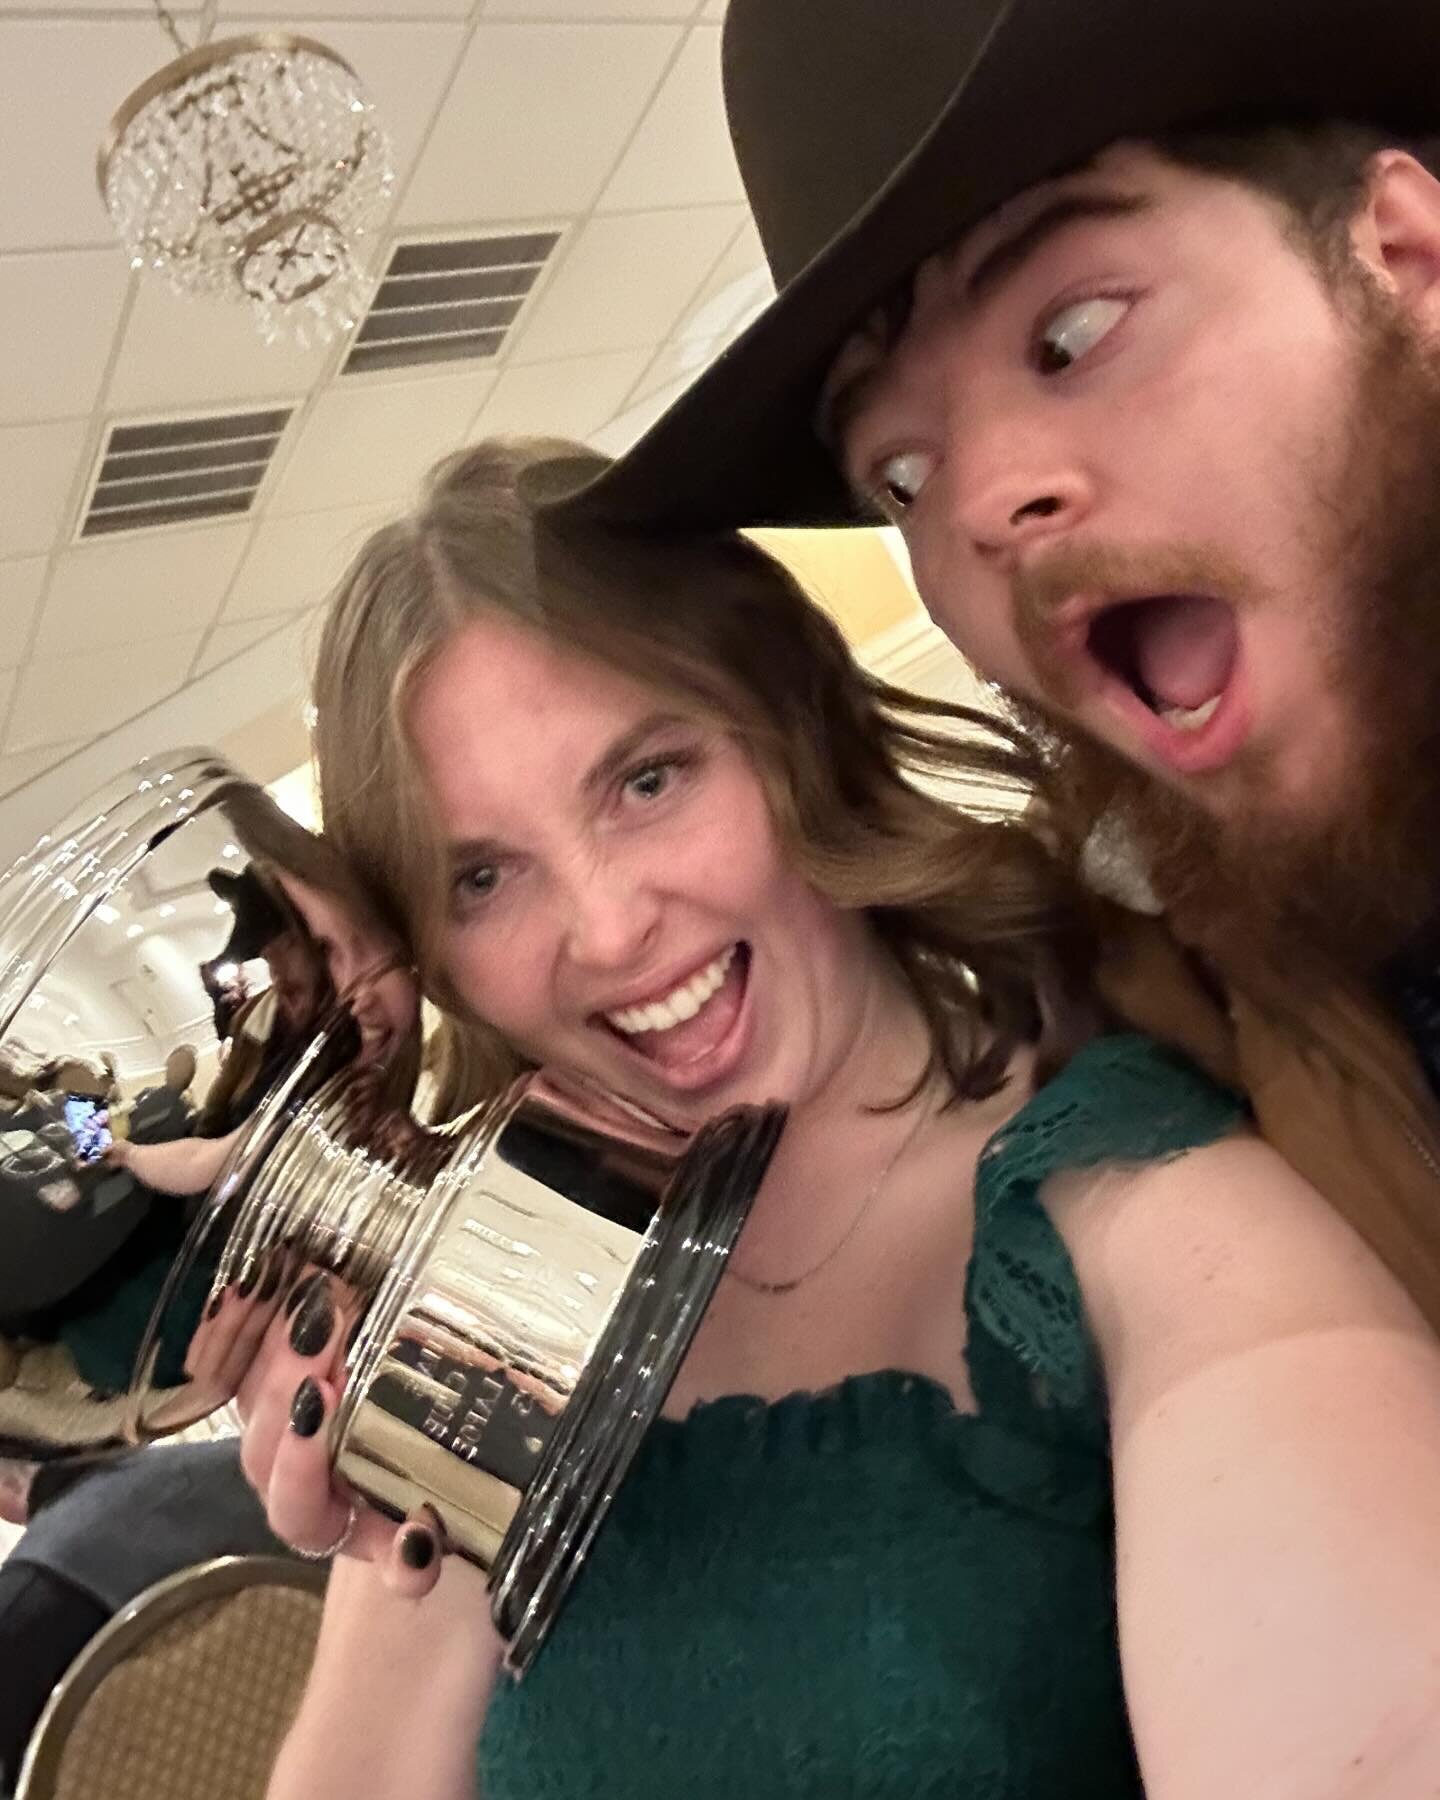 Work party shenanigans 🎉 I hit a milestone in the work life in the last year and even brought home a trophy for it, so excited to be apart of the $100k in services kick ass club🏆 very grateful for every single one of you that I get to work beside e